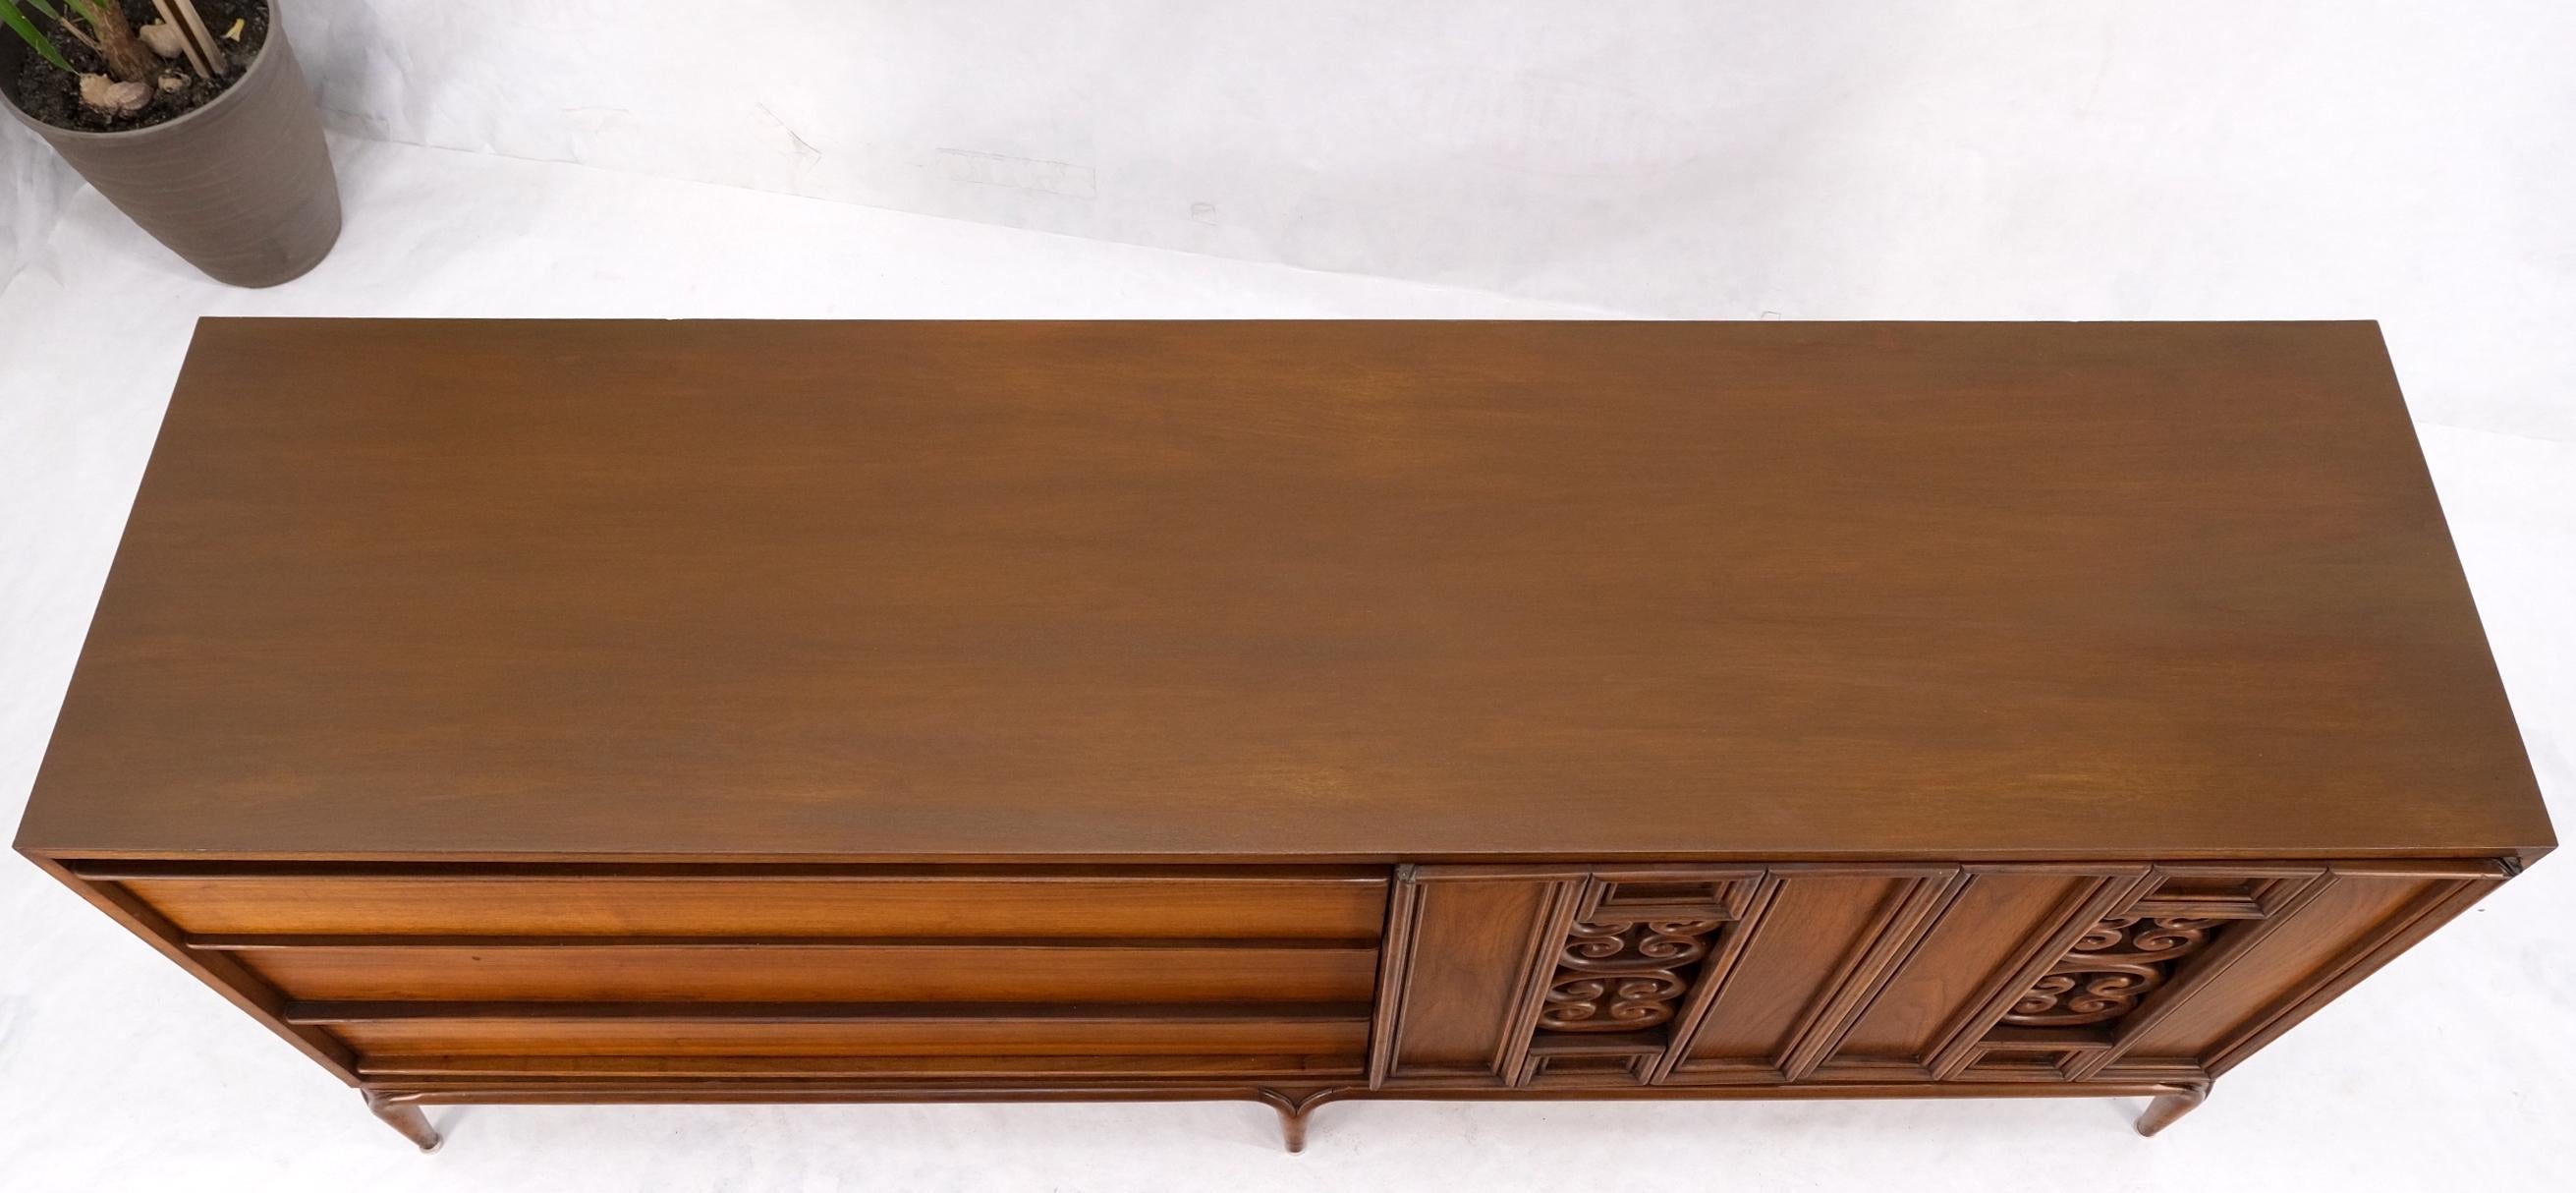 Danish Mid-Century Walnut 6 Drawers Long Credenza Dresser w/ Carved Double Doors For Sale 8